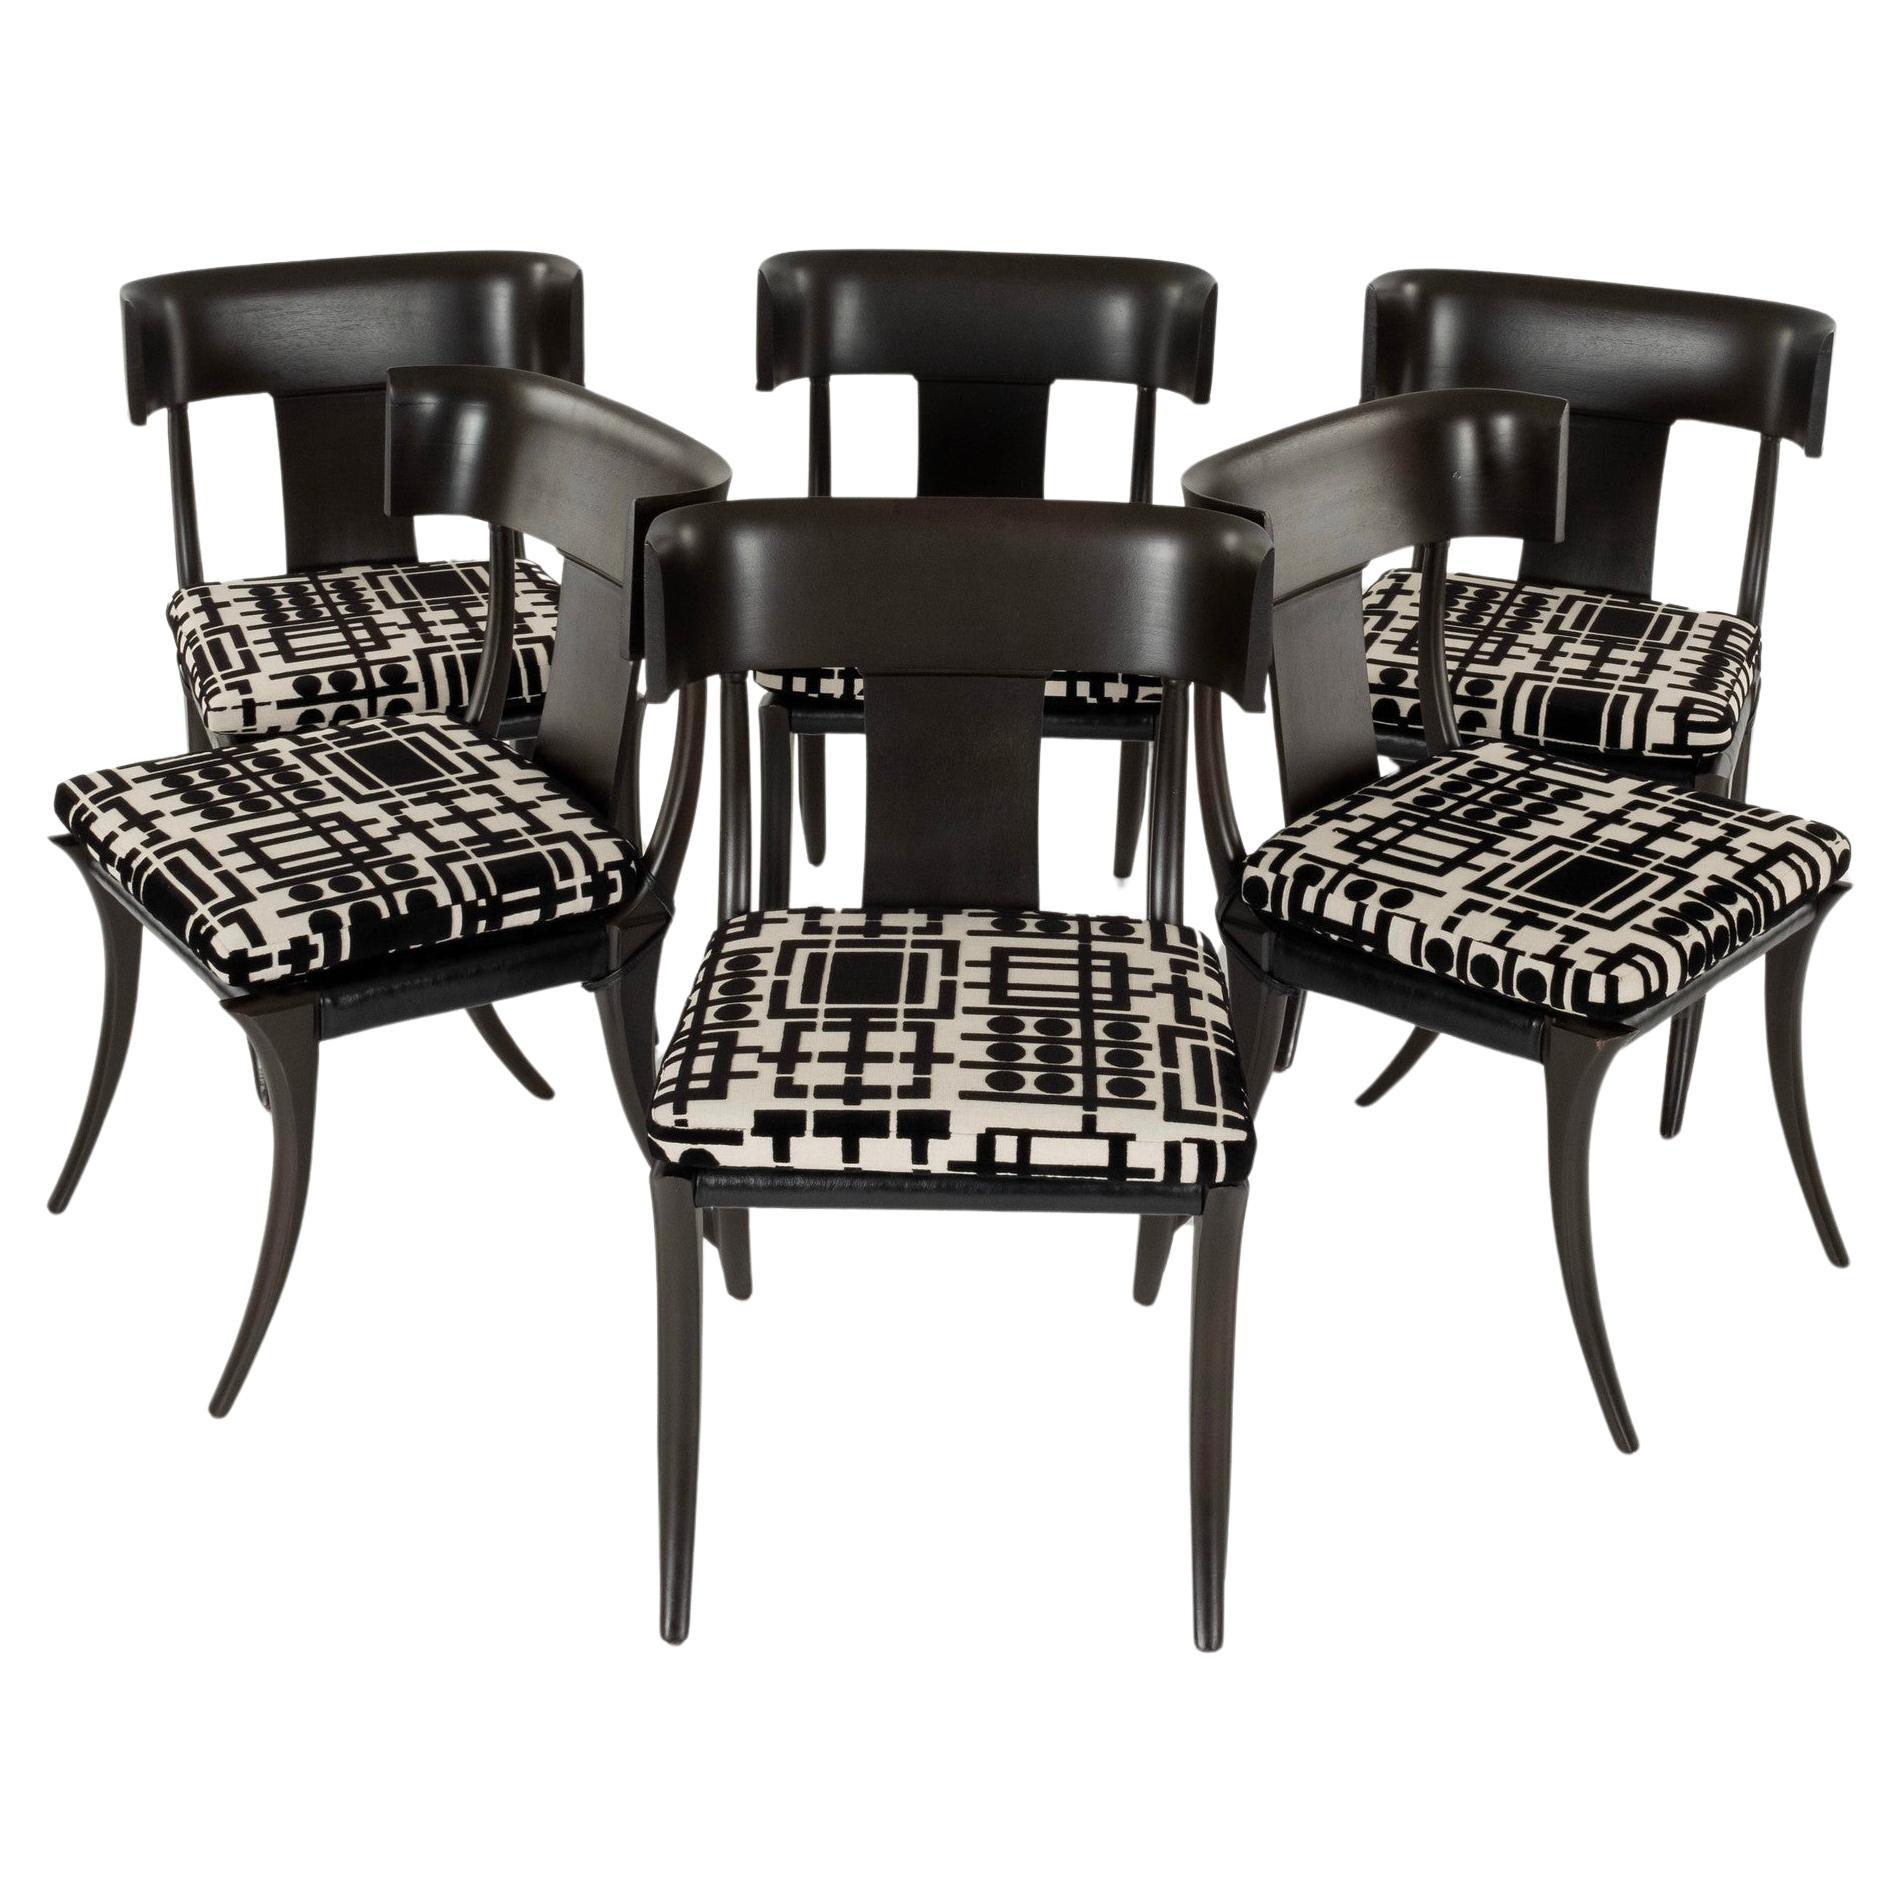 A set of six vintage Neoclassical style ebonized klismos chairs with graphic black and white cut chenille seat cushions.